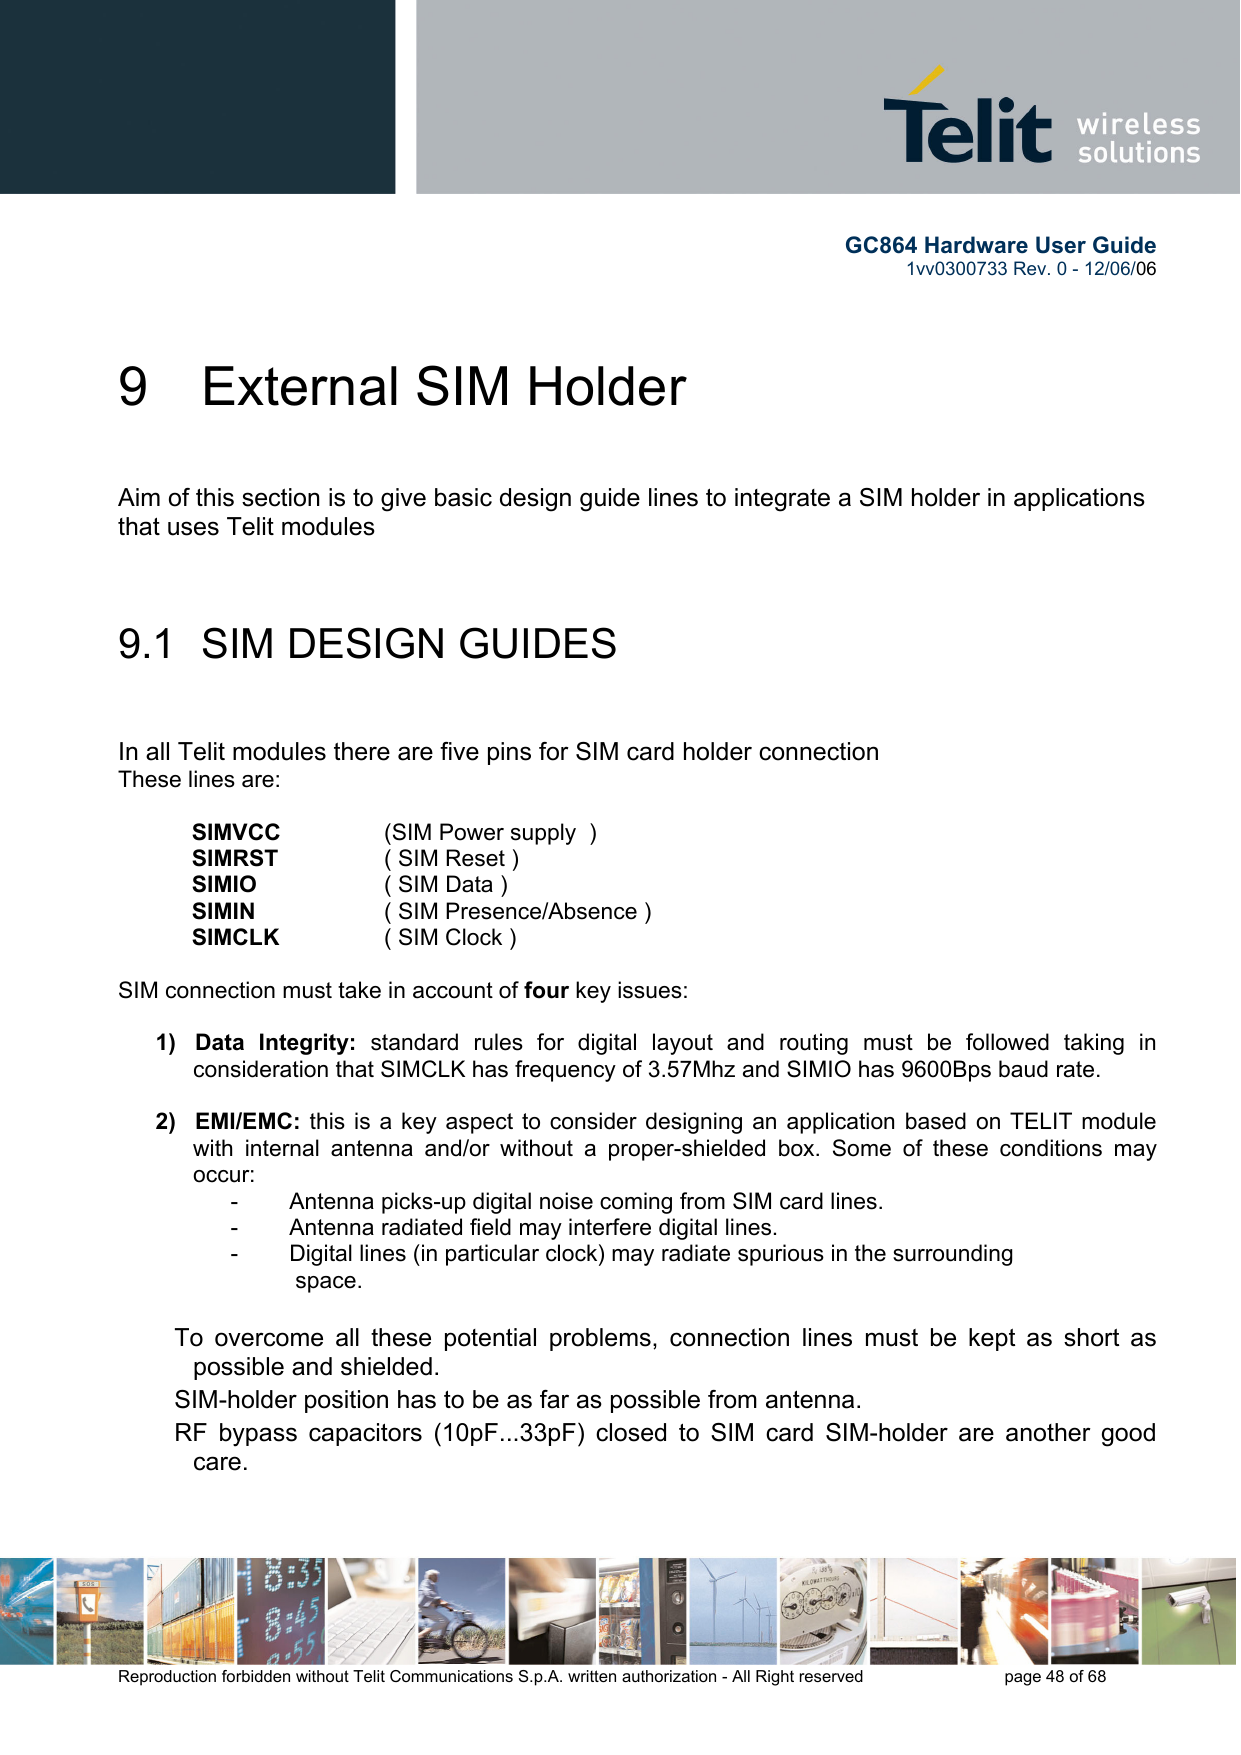        GC864 Hardware User Guide  1vv0300733 Rev. 0 - 12/06/06  Reproduction forbidden without Telit Communications S.p.A. written authorization - All Right reserved    page 48 of 68  9  External SIM Holder  Aim of this section is to give basic design guide lines to integrate a SIM holder in applications that uses Telit modules  9.1  SIM DESIGN GUIDES   In all Telit modules there are five pins for SIM card holder connection These lines are:   SIMVCC    (SIM Power supply  ) SIMRST    ( SIM Reset ) SIMIO    ( SIM Data ) SIMIN    ( SIM Presence/Absence ) SIMCLK    ( SIM Clock )   SIM connection must take in account of four key issues:   1)   Data Integrity: standard rules for digital layout and routing must be followed taking in consideration that SIMCLK has frequency of 3.57Mhz and SIMIO has 9600Bps baud rate.  2)   EMI/EMC: this is a key aspect to consider designing an application based on TELIT module with internal antenna and/or without a proper-shielded box. Some of these conditions may occur: -        Antenna picks-up digital noise coming from SIM card lines. -        Antenna radiated field may interfere digital lines. -        Digital lines (in particular clock) may radiate spurious in the surrounding    space.  To overcome all these potential problems, connection lines must be kept as short as possible and shielded.  SIM-holder position has to be as far as possible from antenna.  RF bypass capacitors (10pF...33pF) closed to SIM card SIM-holder are another good care.  